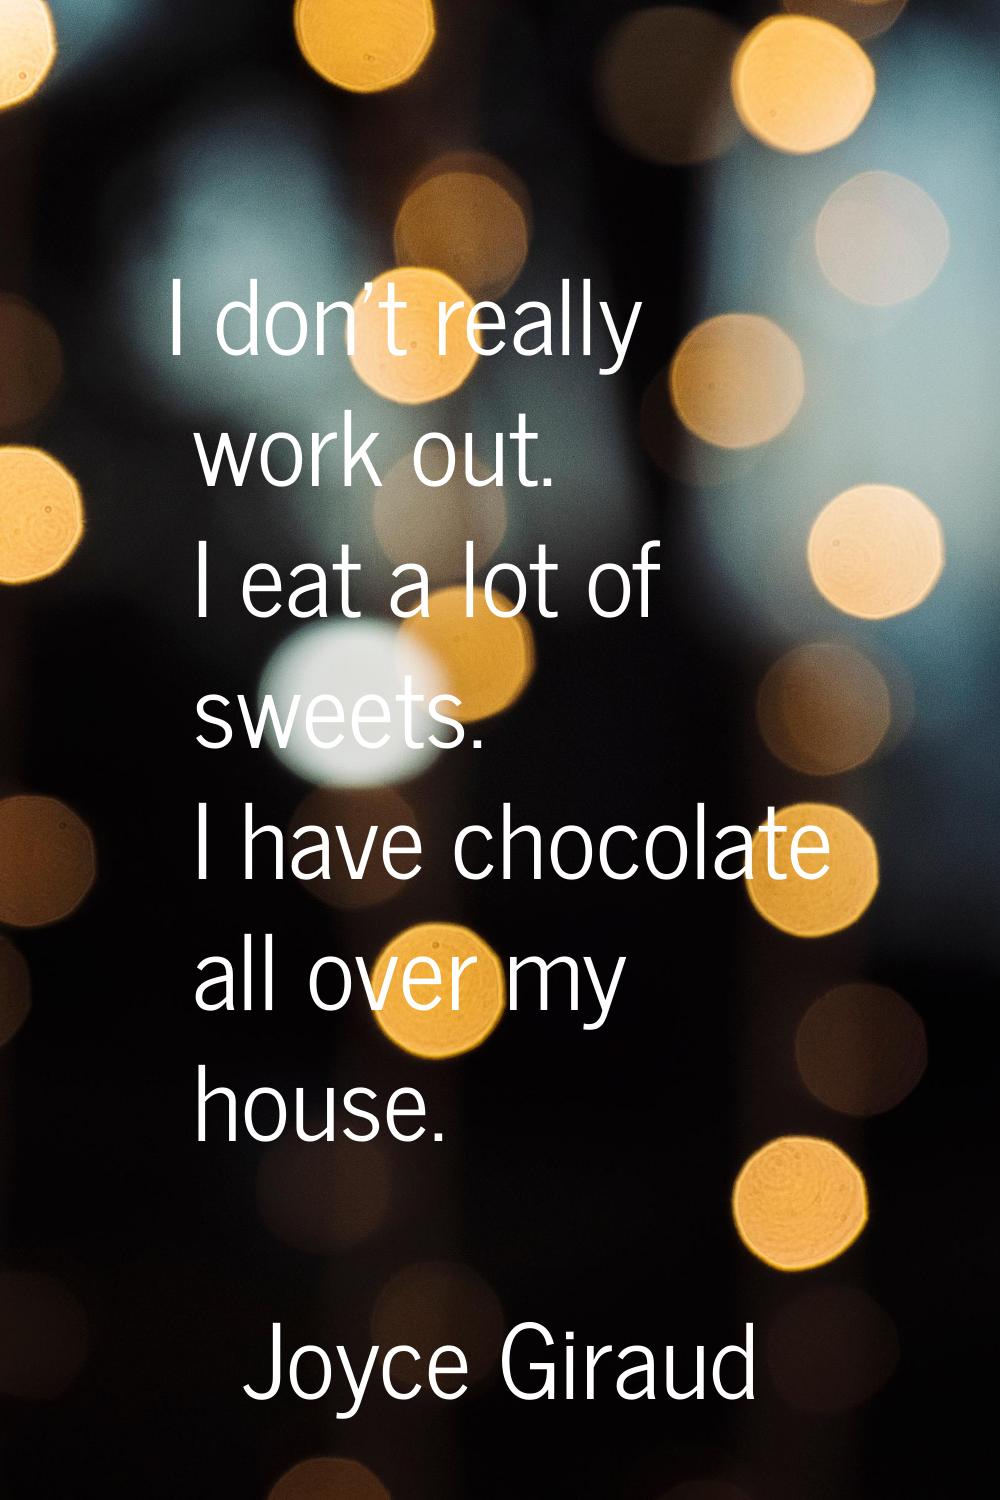 I don't really work out. I eat a lot of sweets. I have chocolate all over my house.